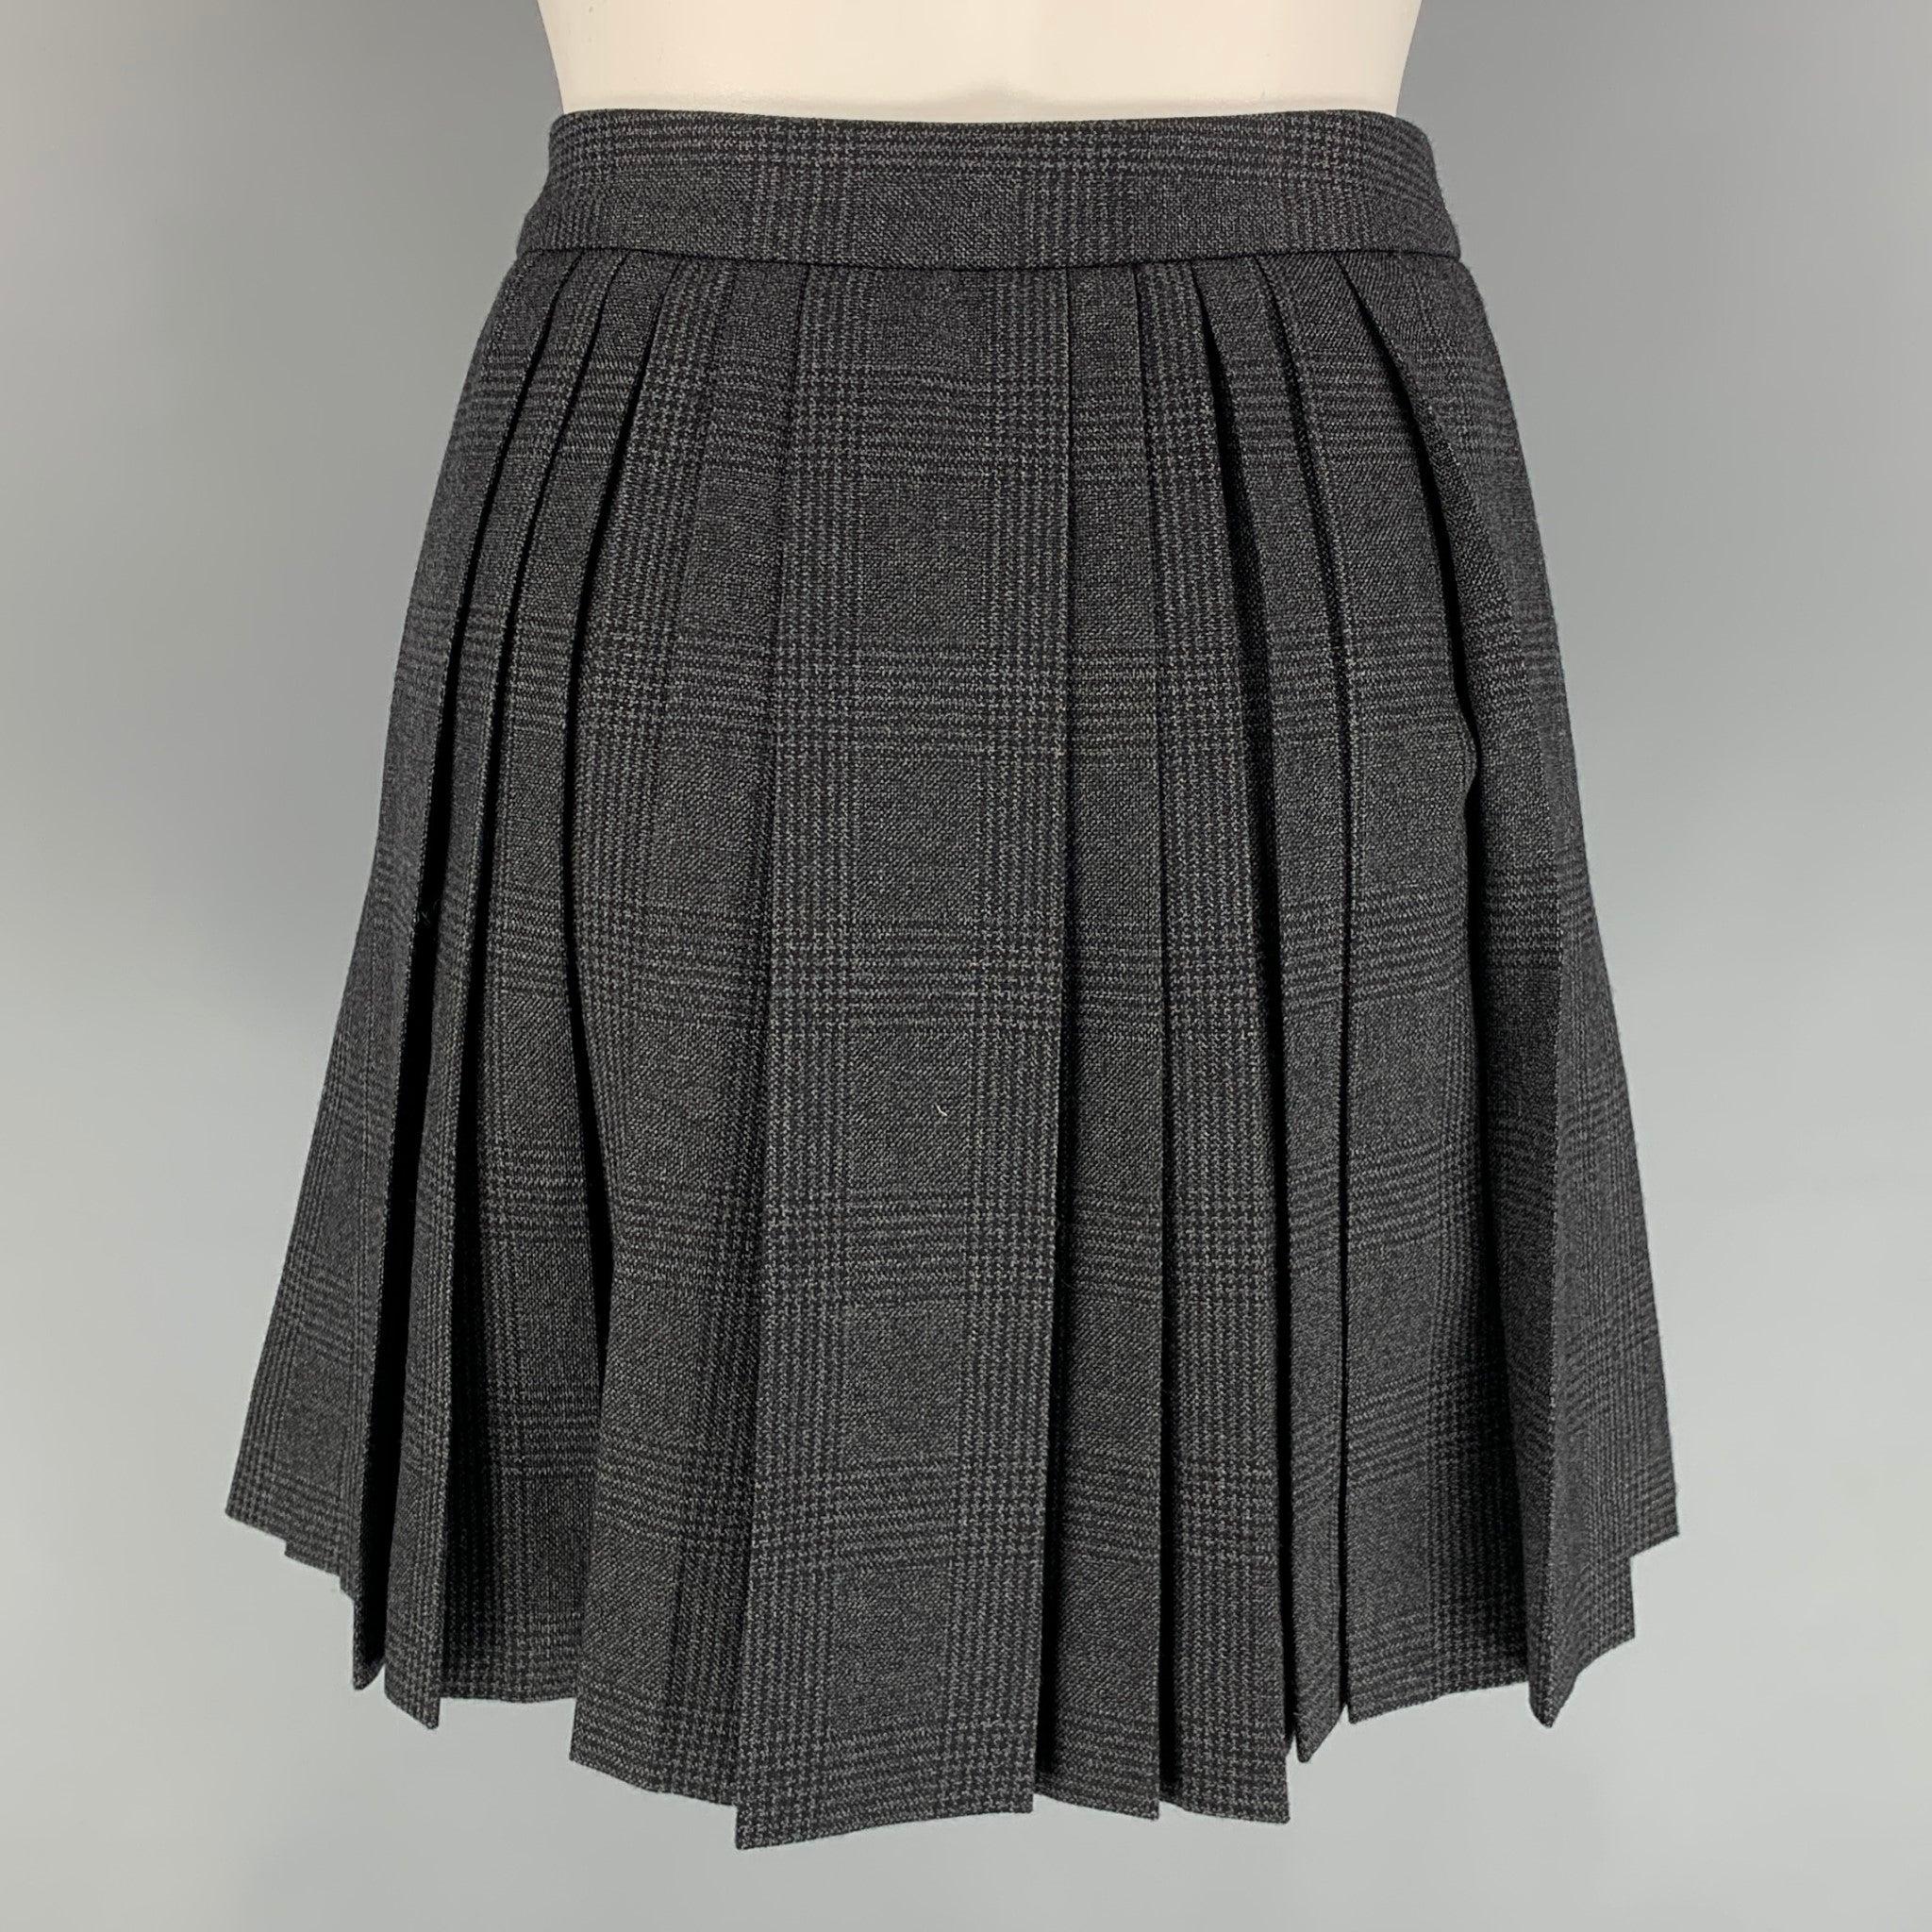 CELINE Size 4 Charcoal Plaid Wool Pleated Mini Skirt In Good Condition For Sale In San Francisco, CA